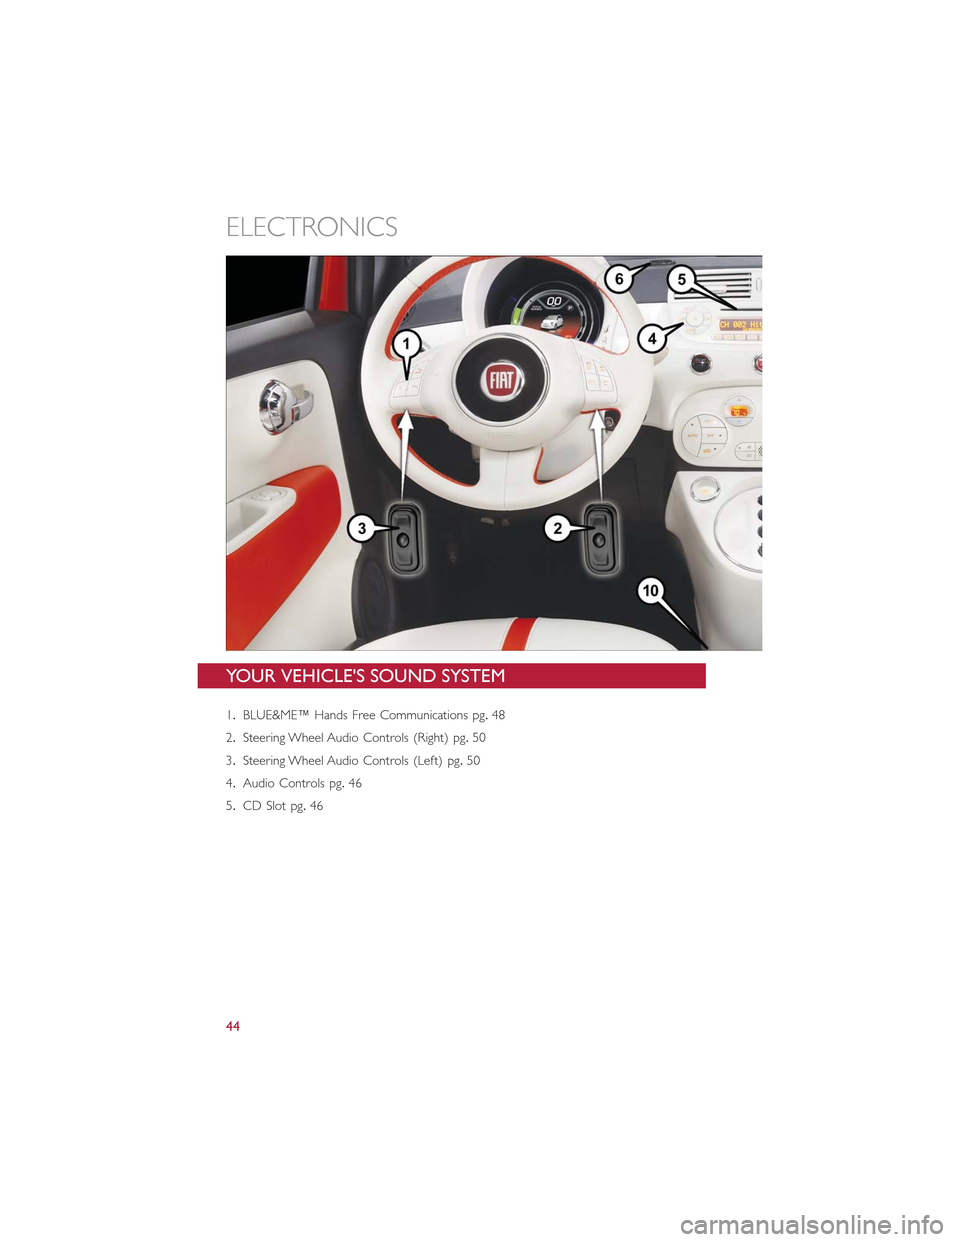 FIAT 500E 2015 2.G User Guide YOUR VEHICLES SOUND SYSTEM
1.BLUE&ME™ Hands Free Communications pg.48
2.Steering Wheel Audio Controls (Right) pg.50
3.Steering Wheel Audio Controls (Left) pg.50
4.Audio Controls pg.46
5.CD Slot pg.